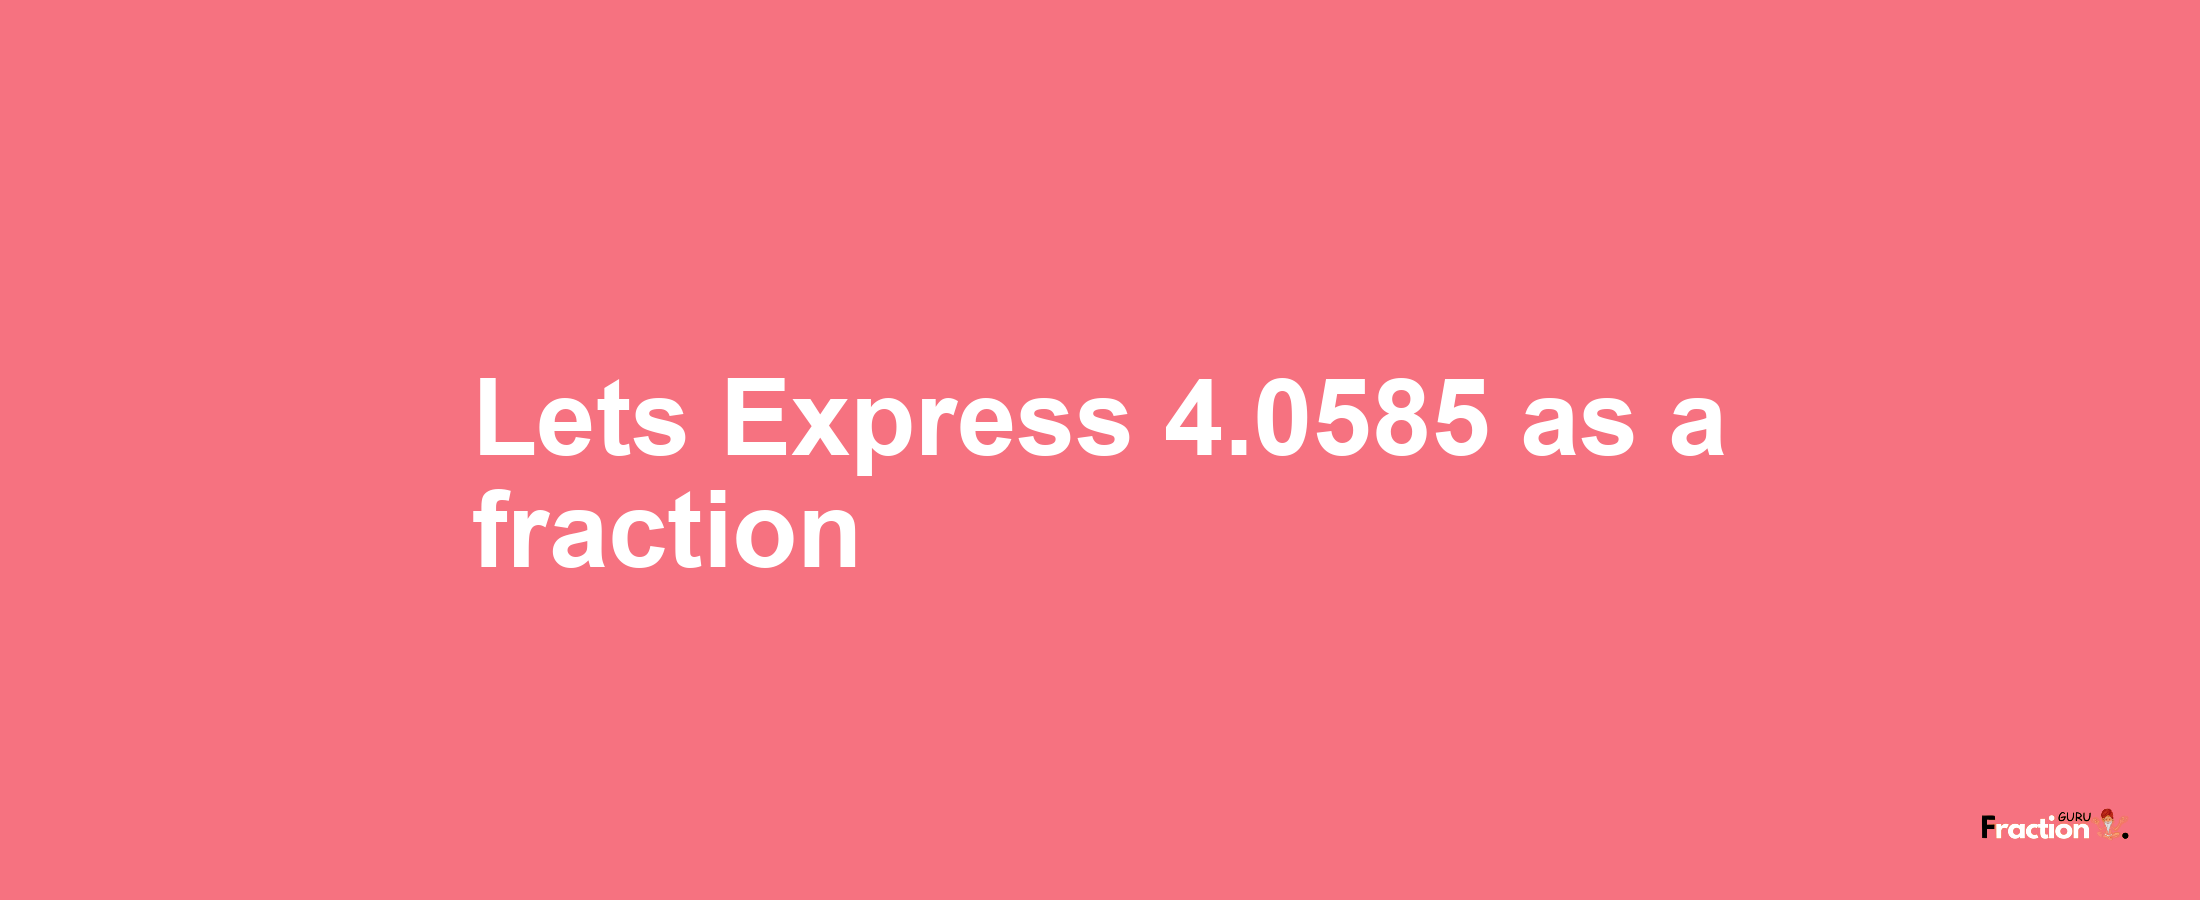 Lets Express 4.0585 as afraction